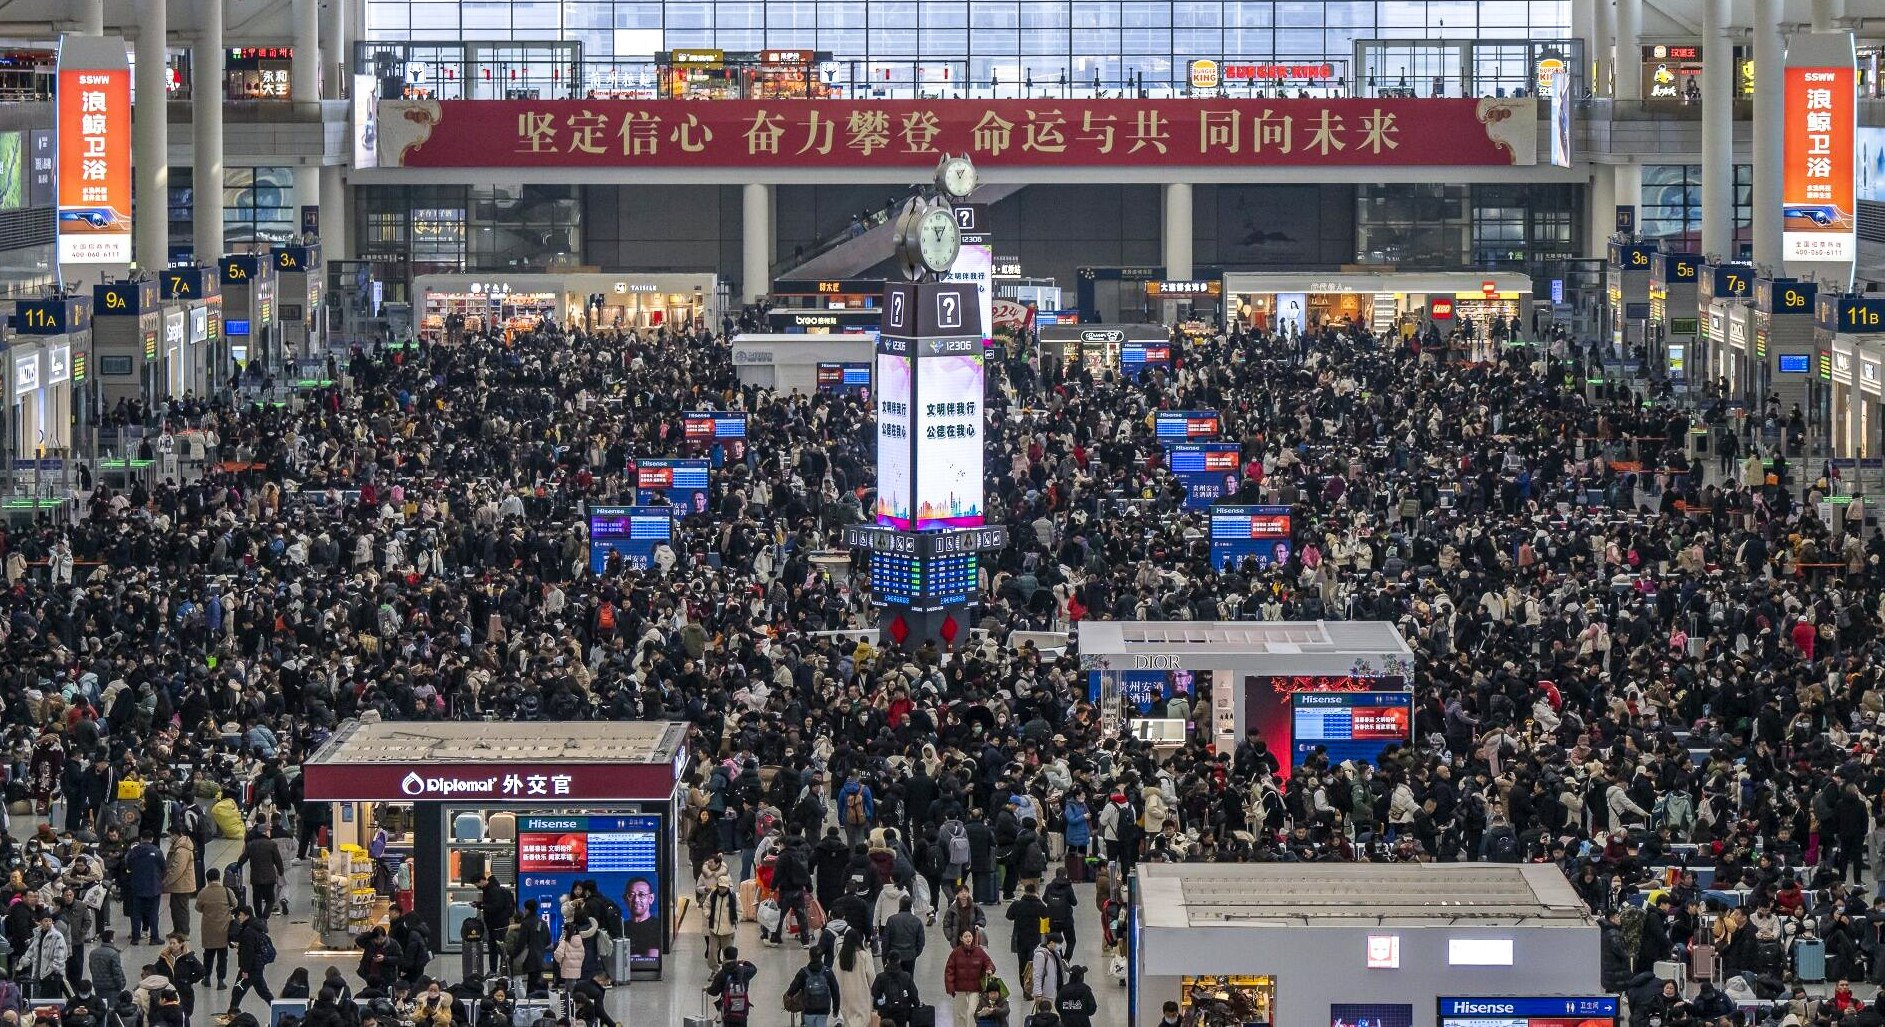 Travellers gather at Shanghai Hongqiao railway station on Friday, the first day of China’s Lunar New Year travel period. Photo: Bloomberg